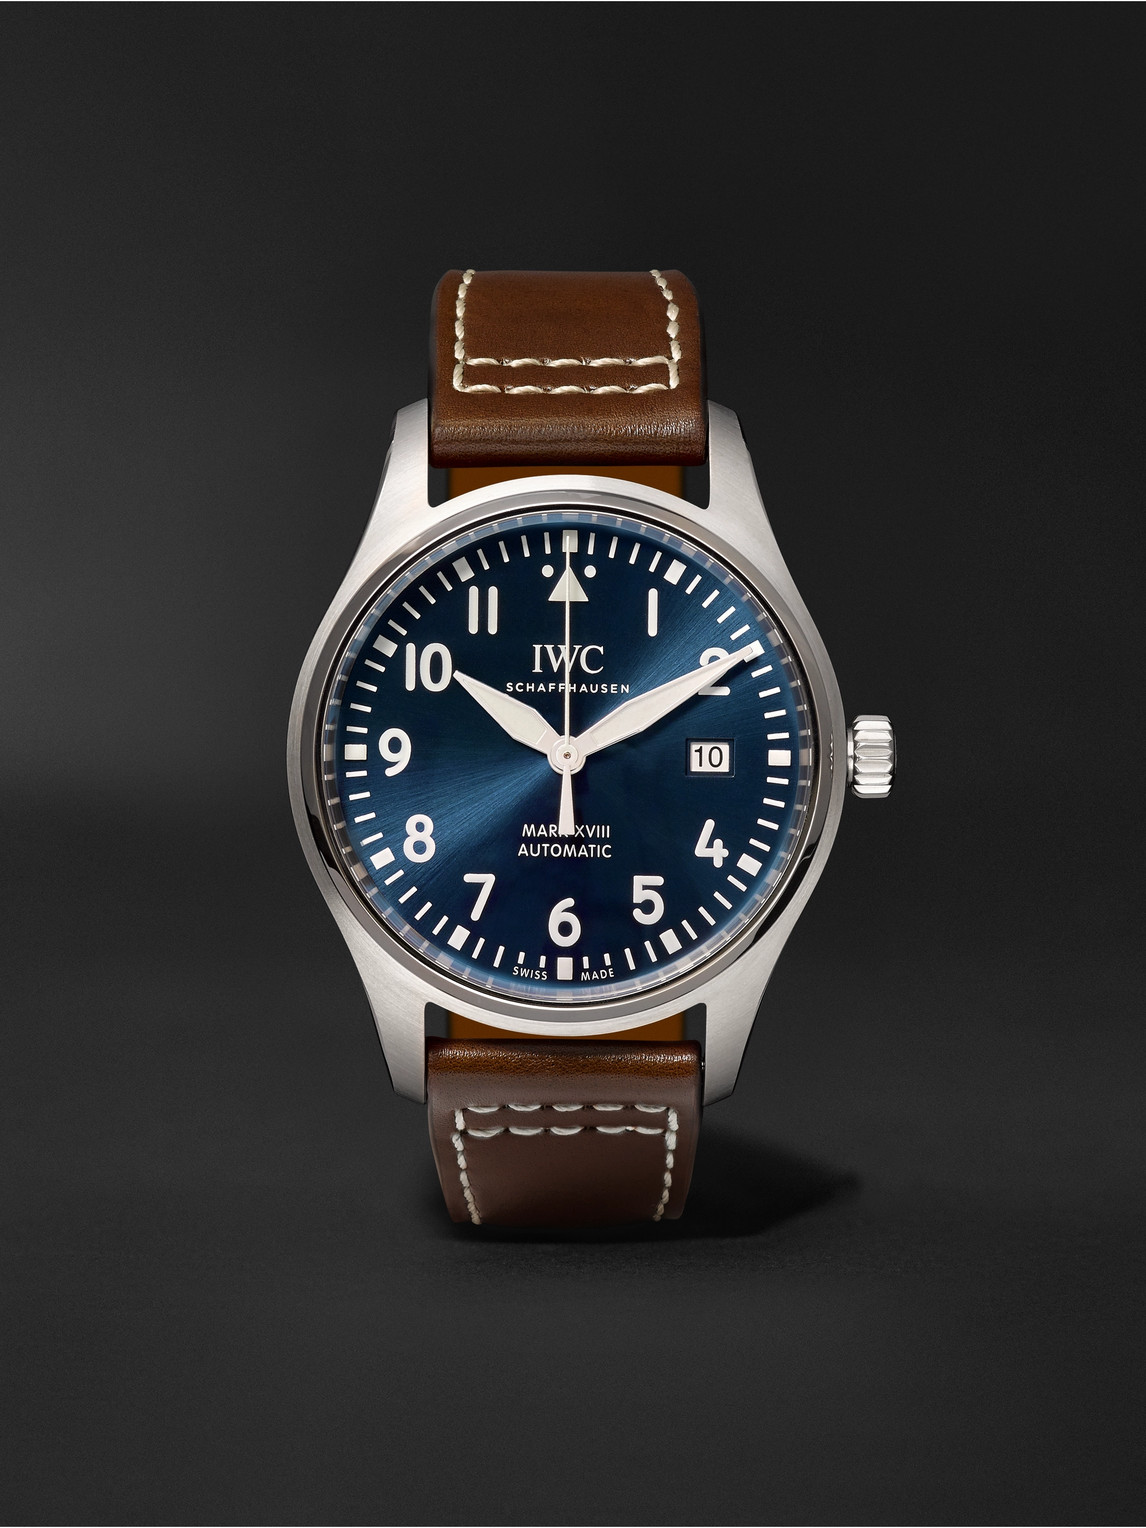 Pilot's Mark XVIII Le Petit Prince Edition Automatic 40mm Stainless Steel and Textile Watch, Ref. No. IW327004